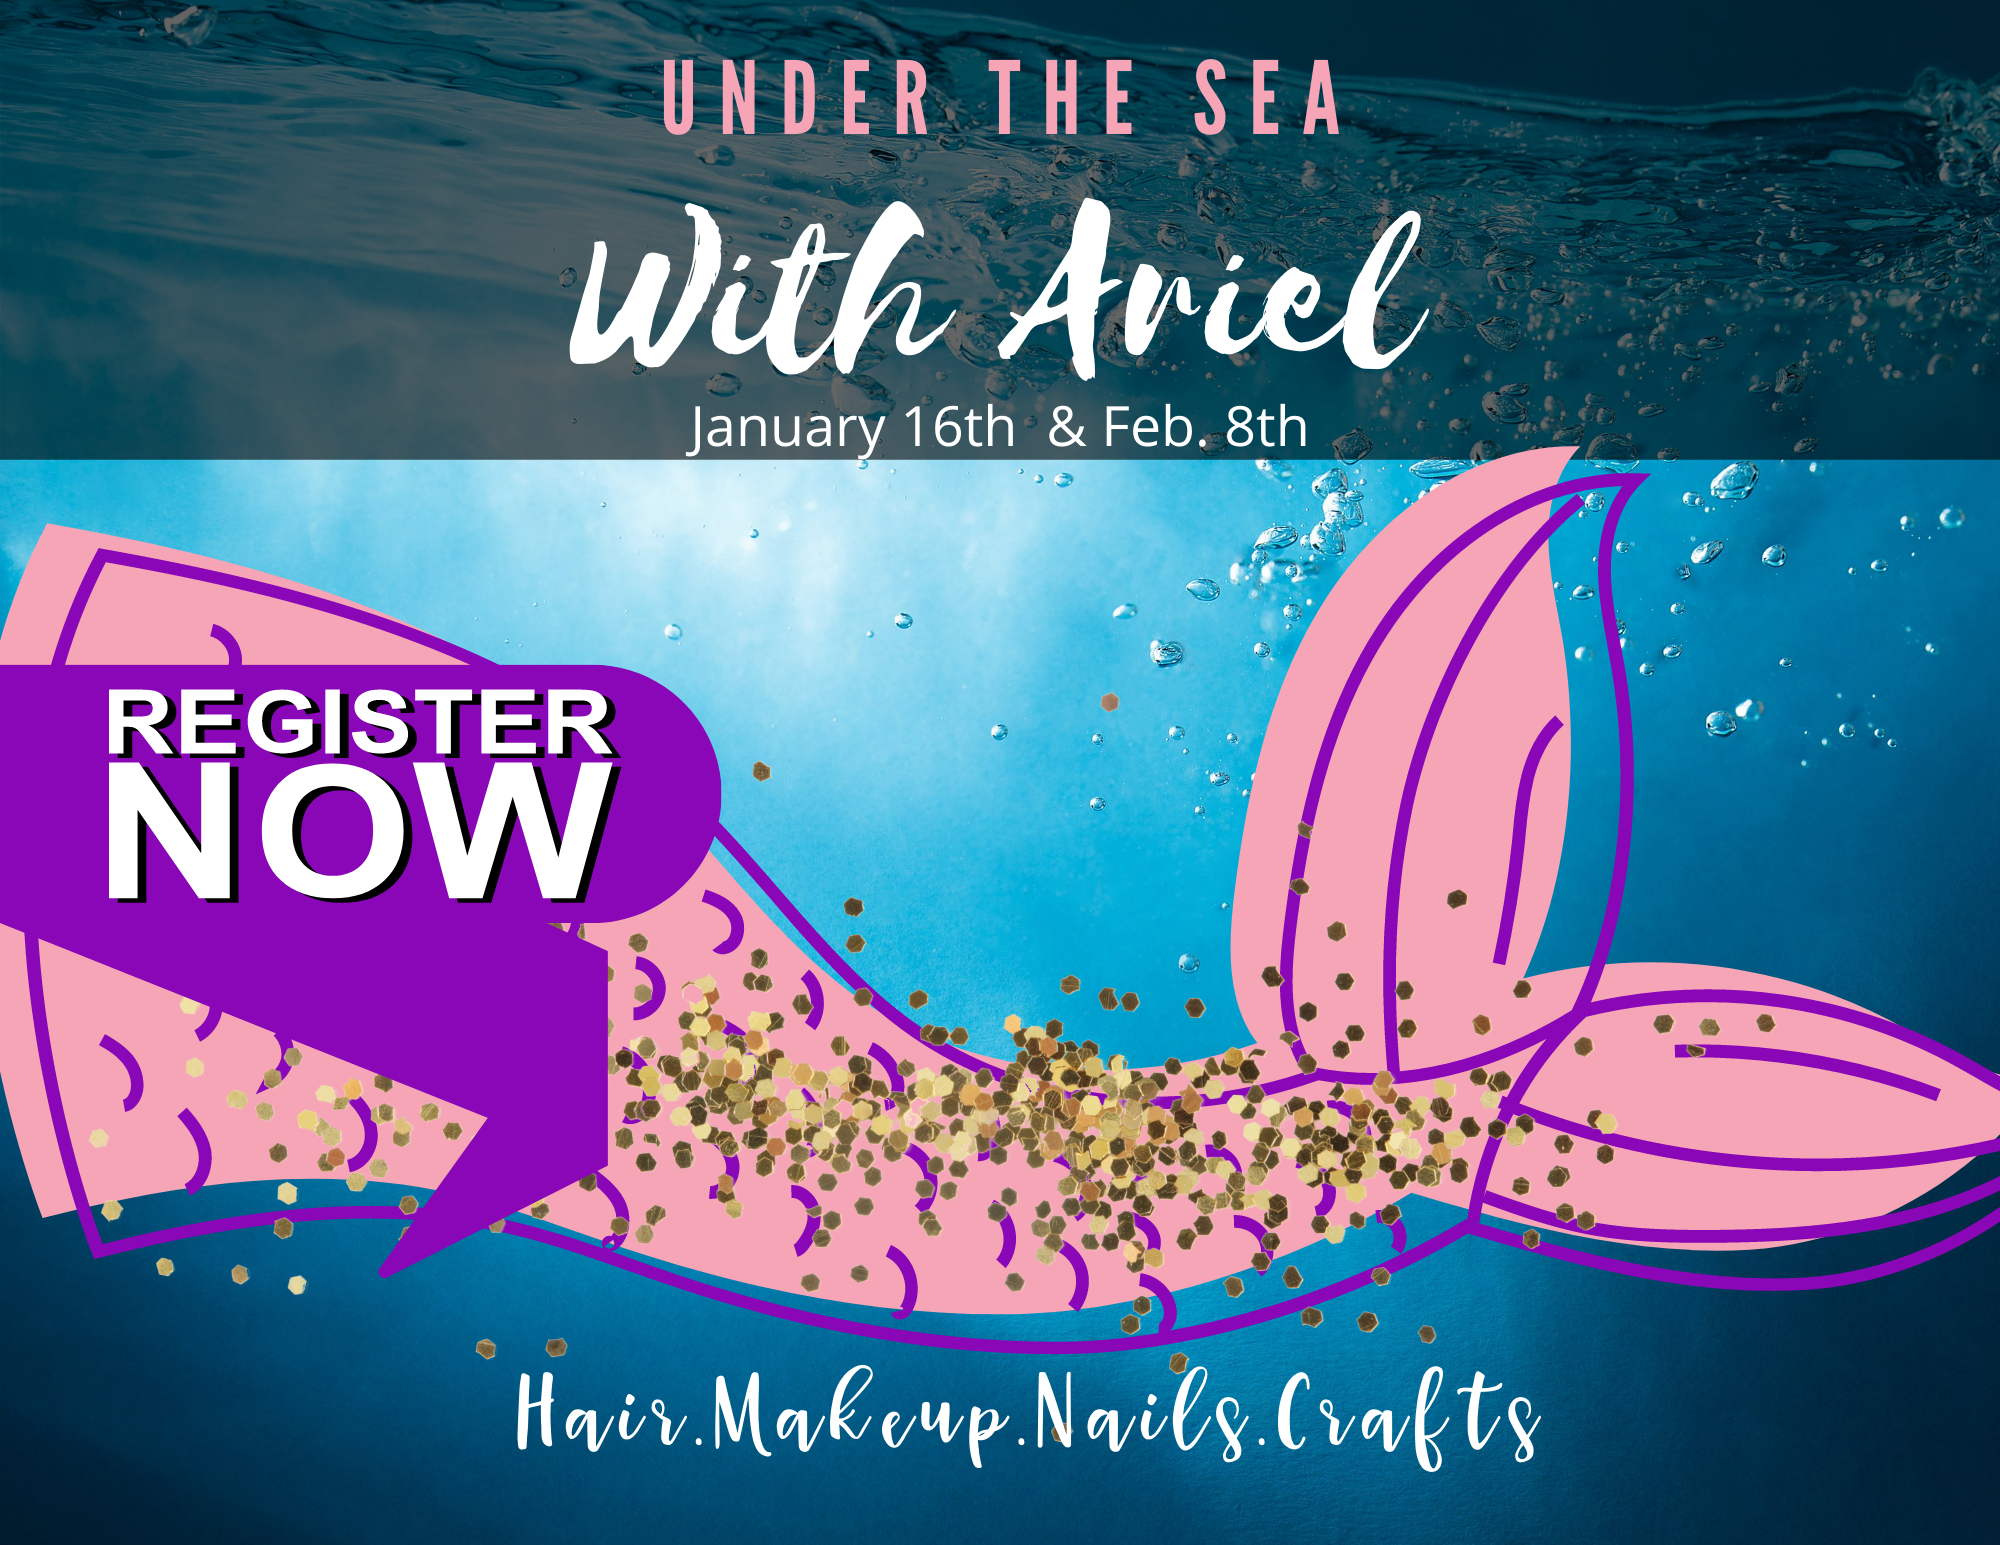 under the sea with ariel event